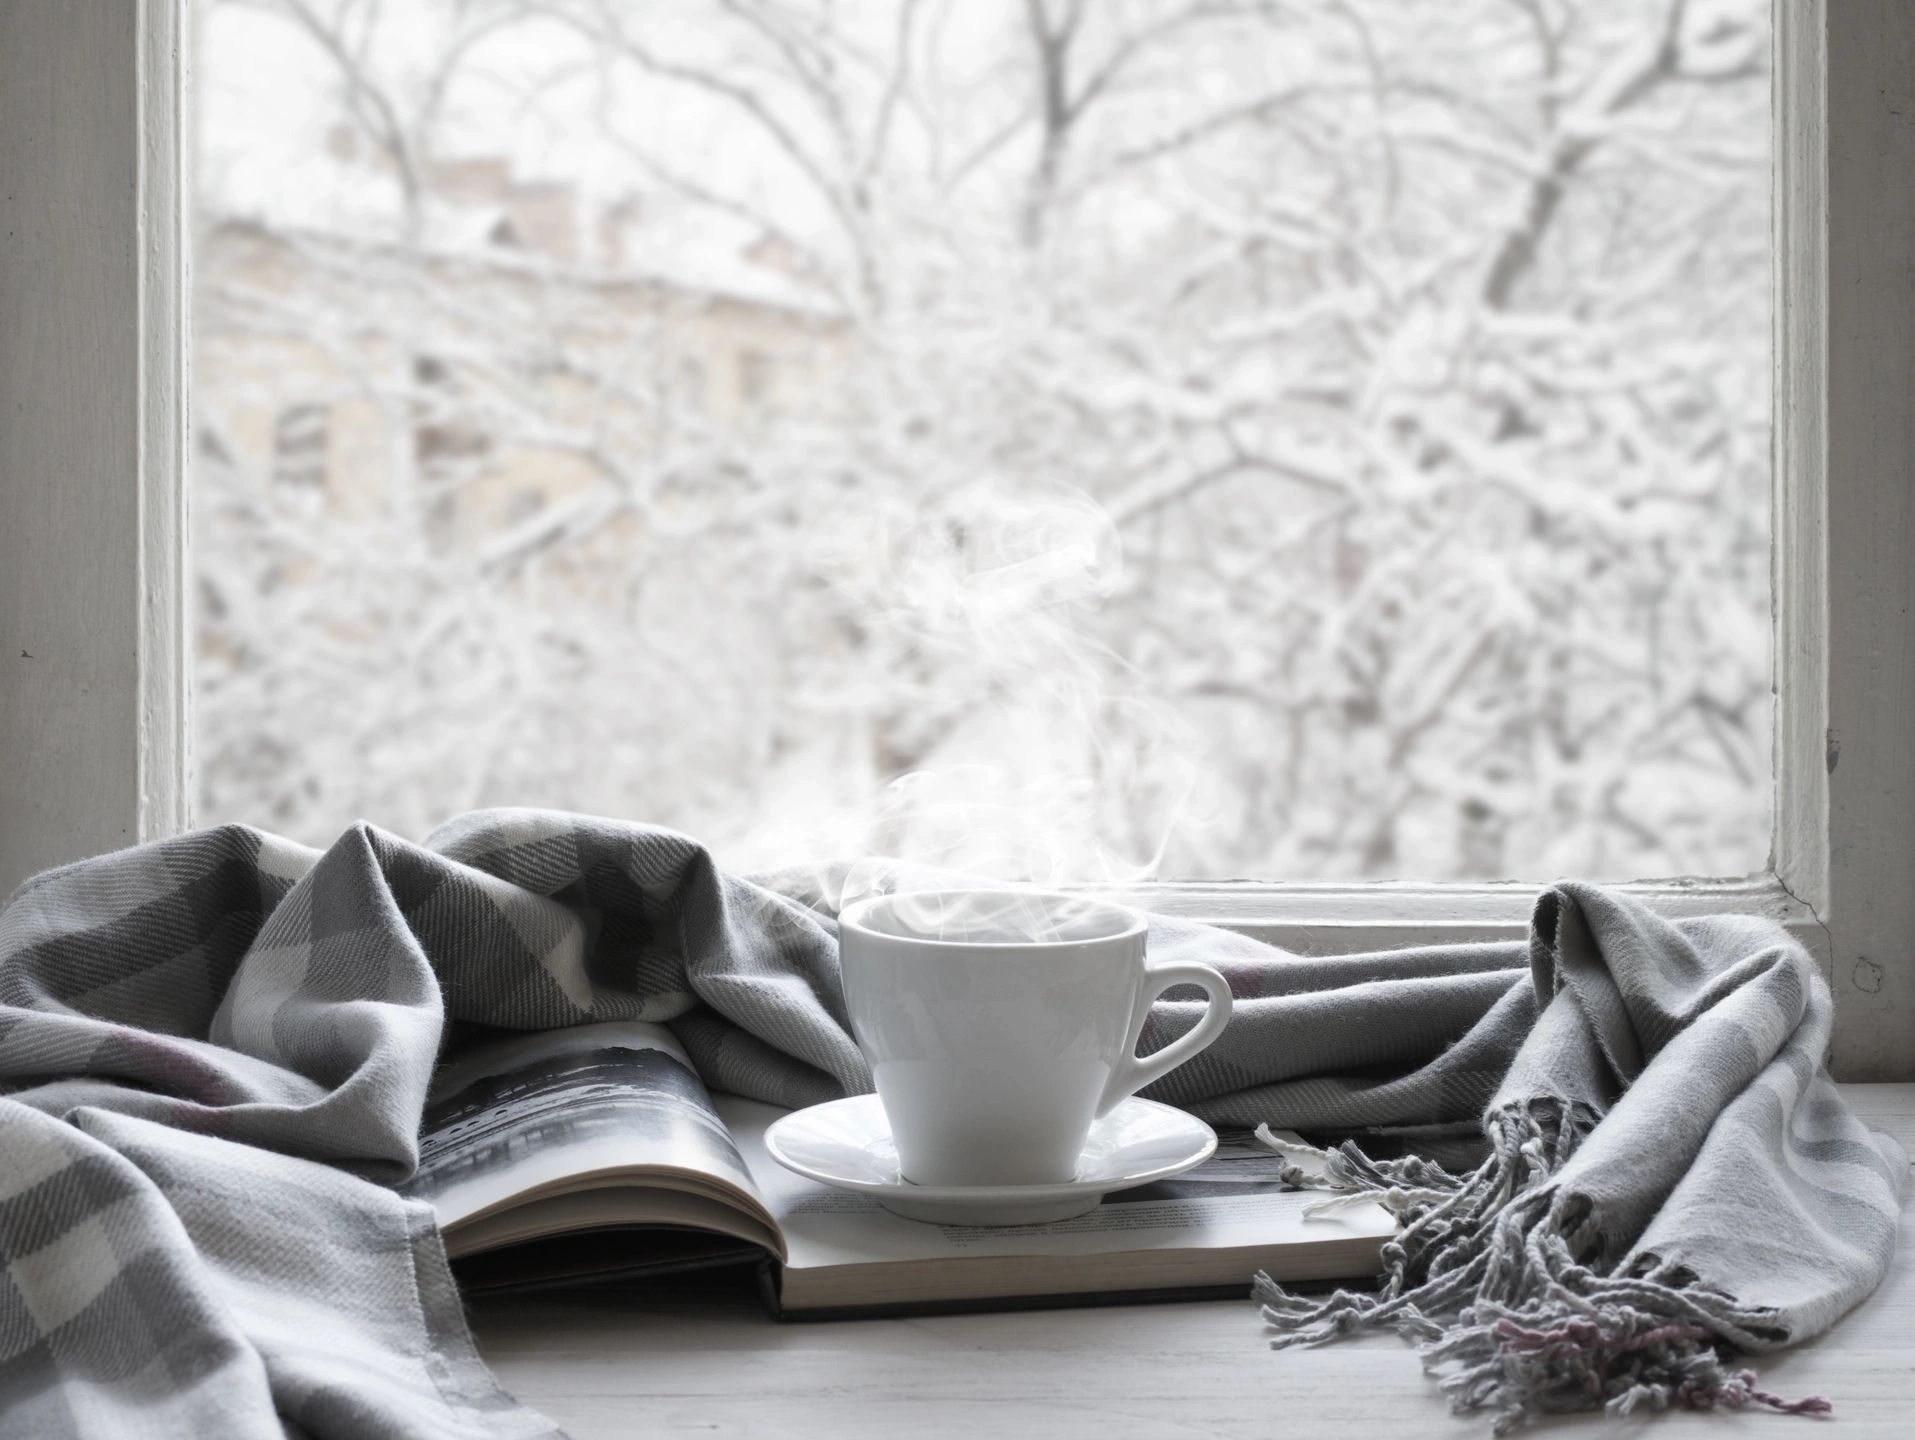 A cup of hot coffee on a book with a blanket laying around it